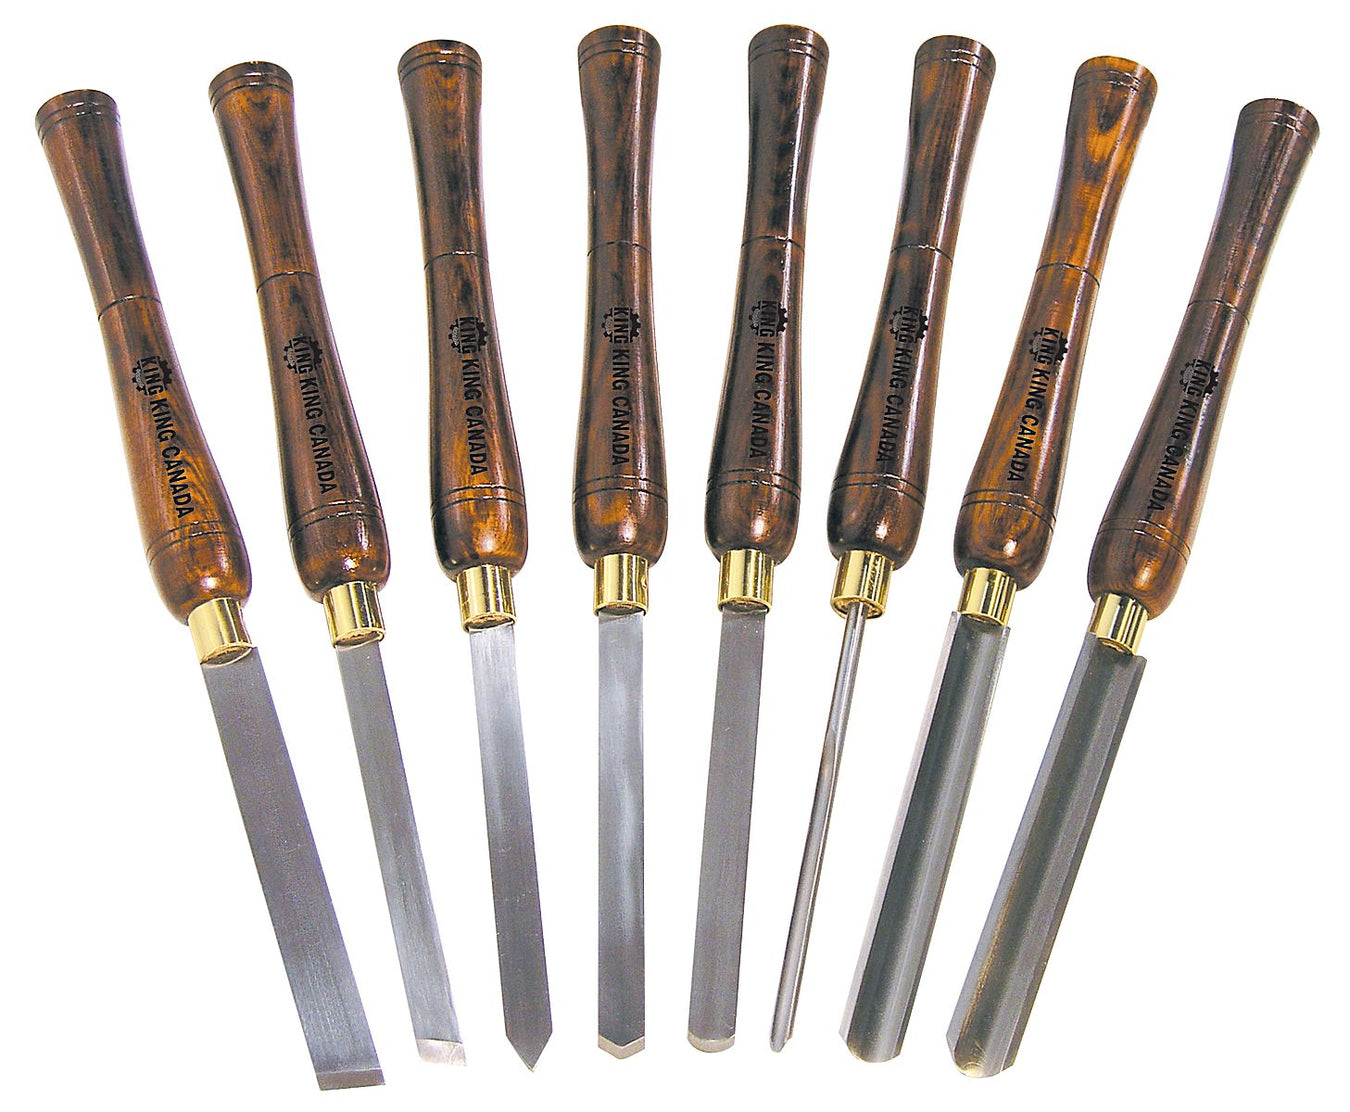 Chisels / Carving